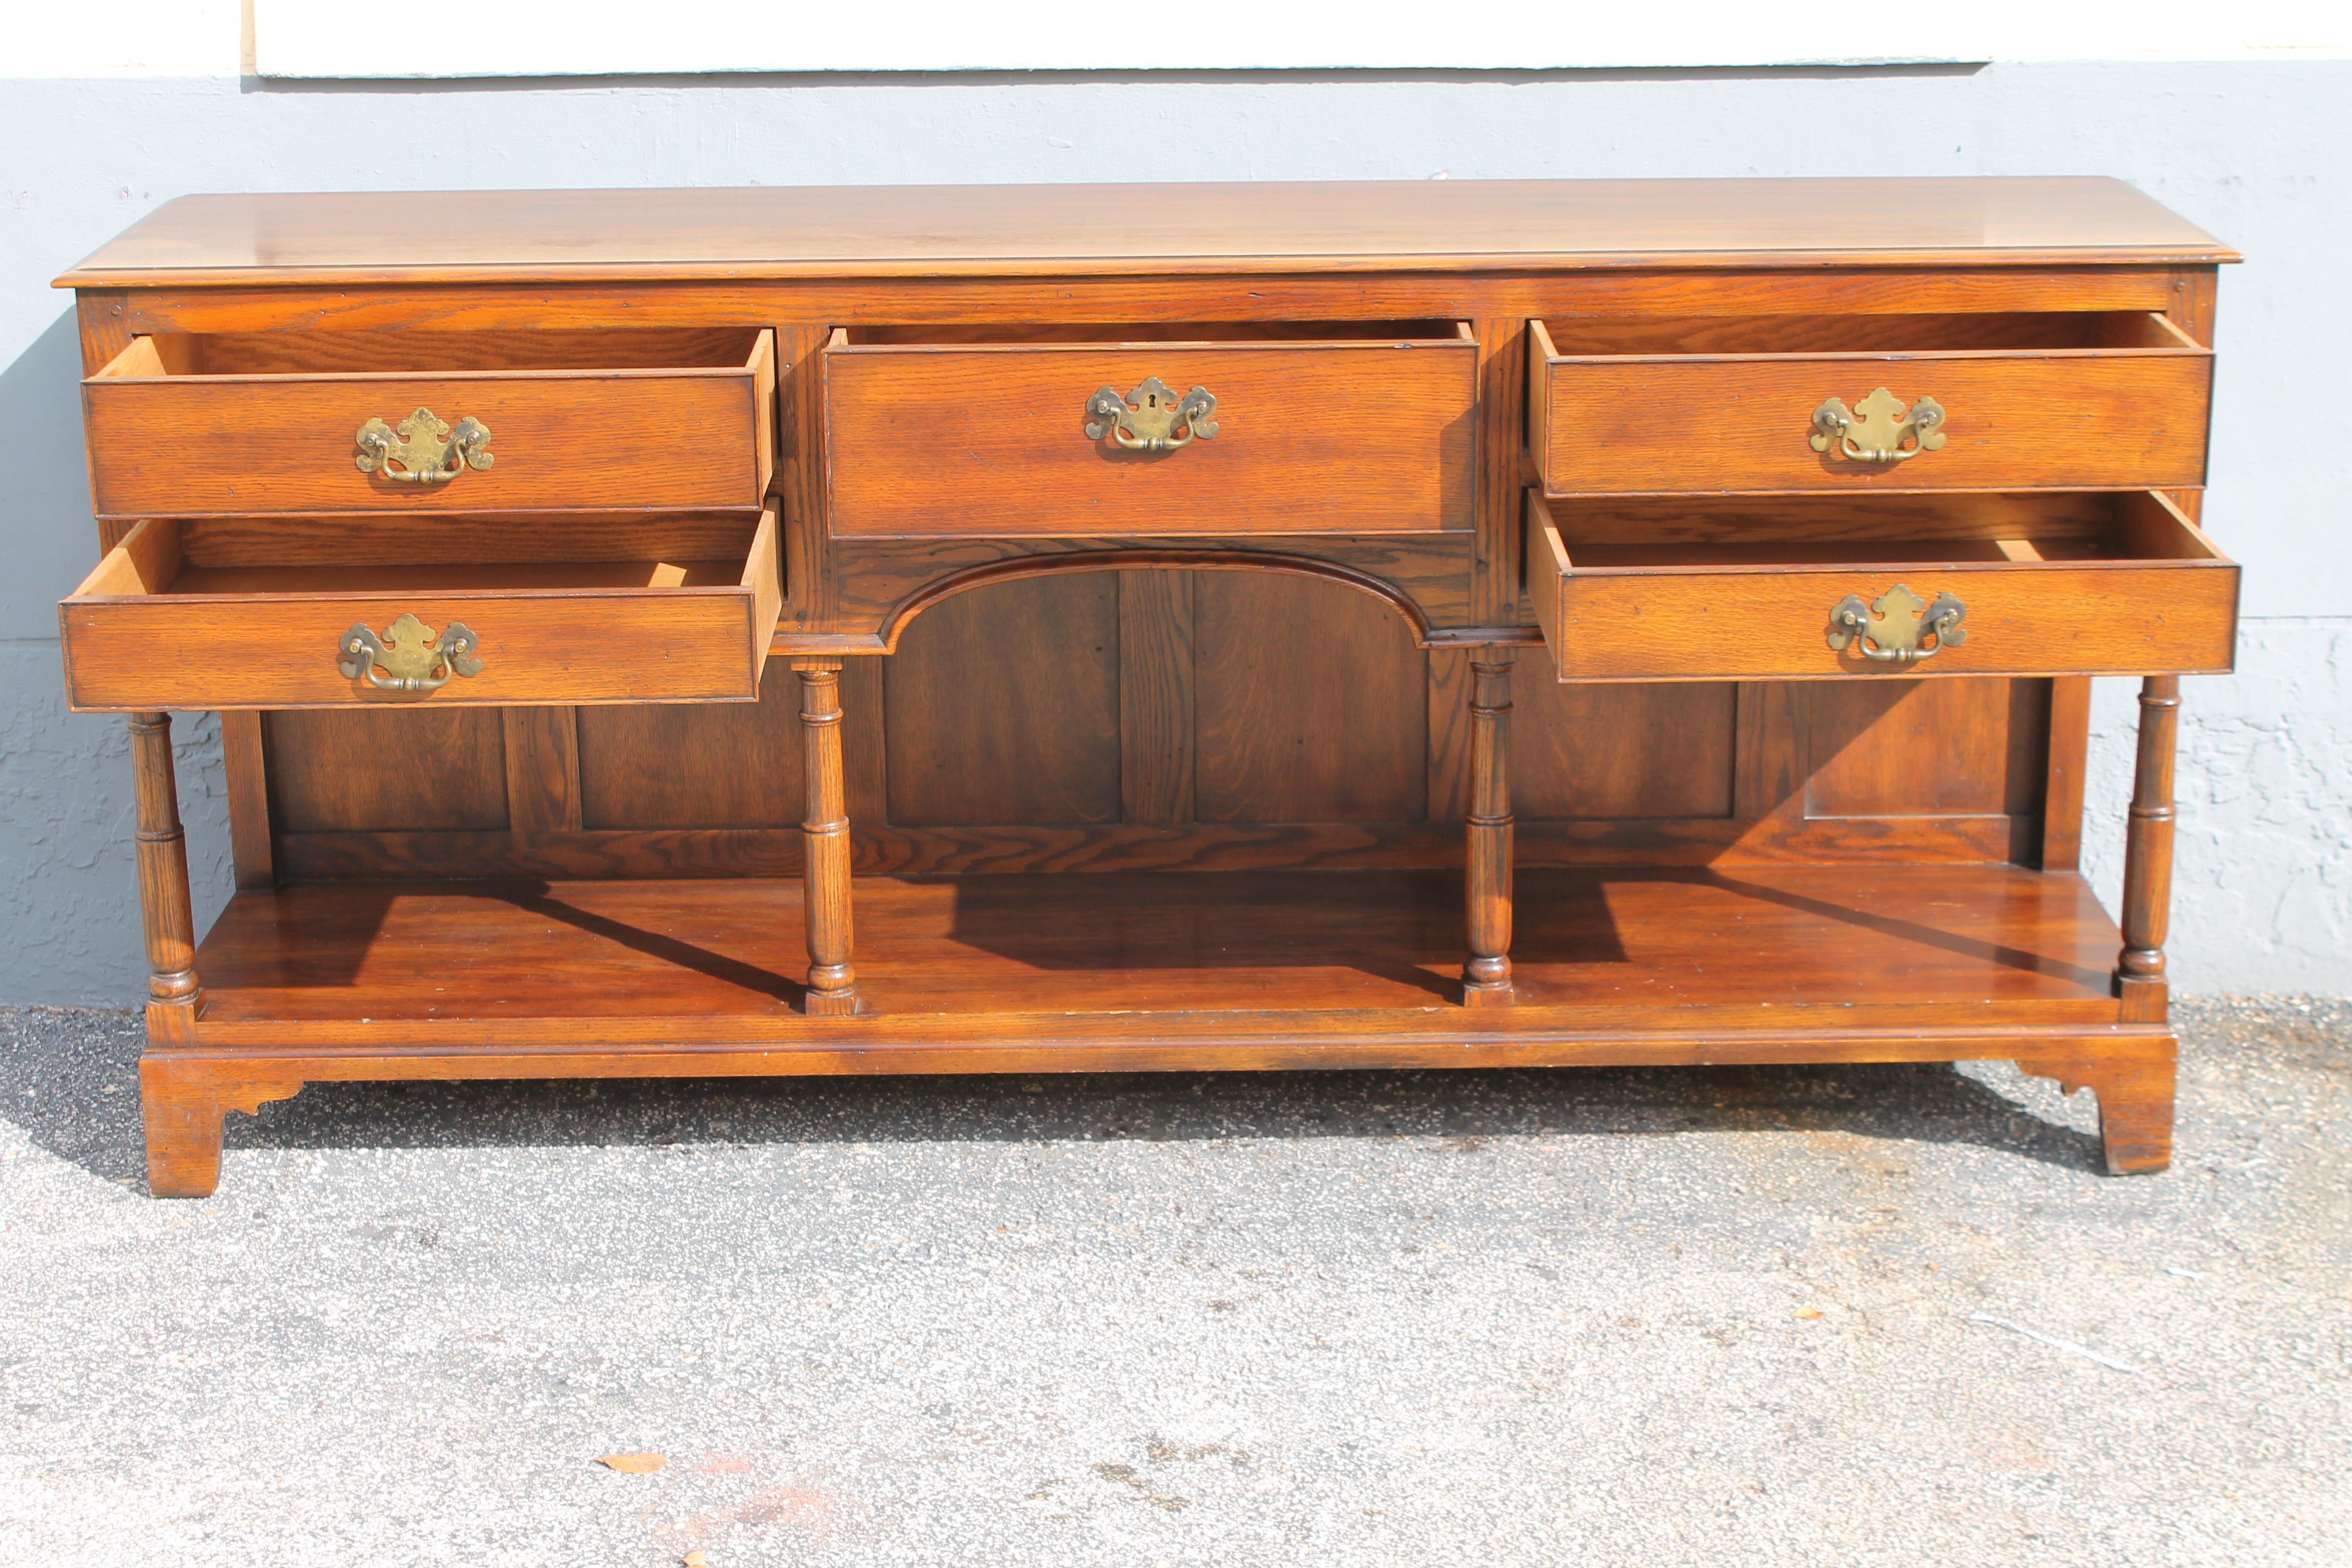 1970's Vintage Signed John Widdicomb Buffet/ Sideboard/ Credenza/ Dry Bar In Good Condition For Sale In Opa Locka, FL